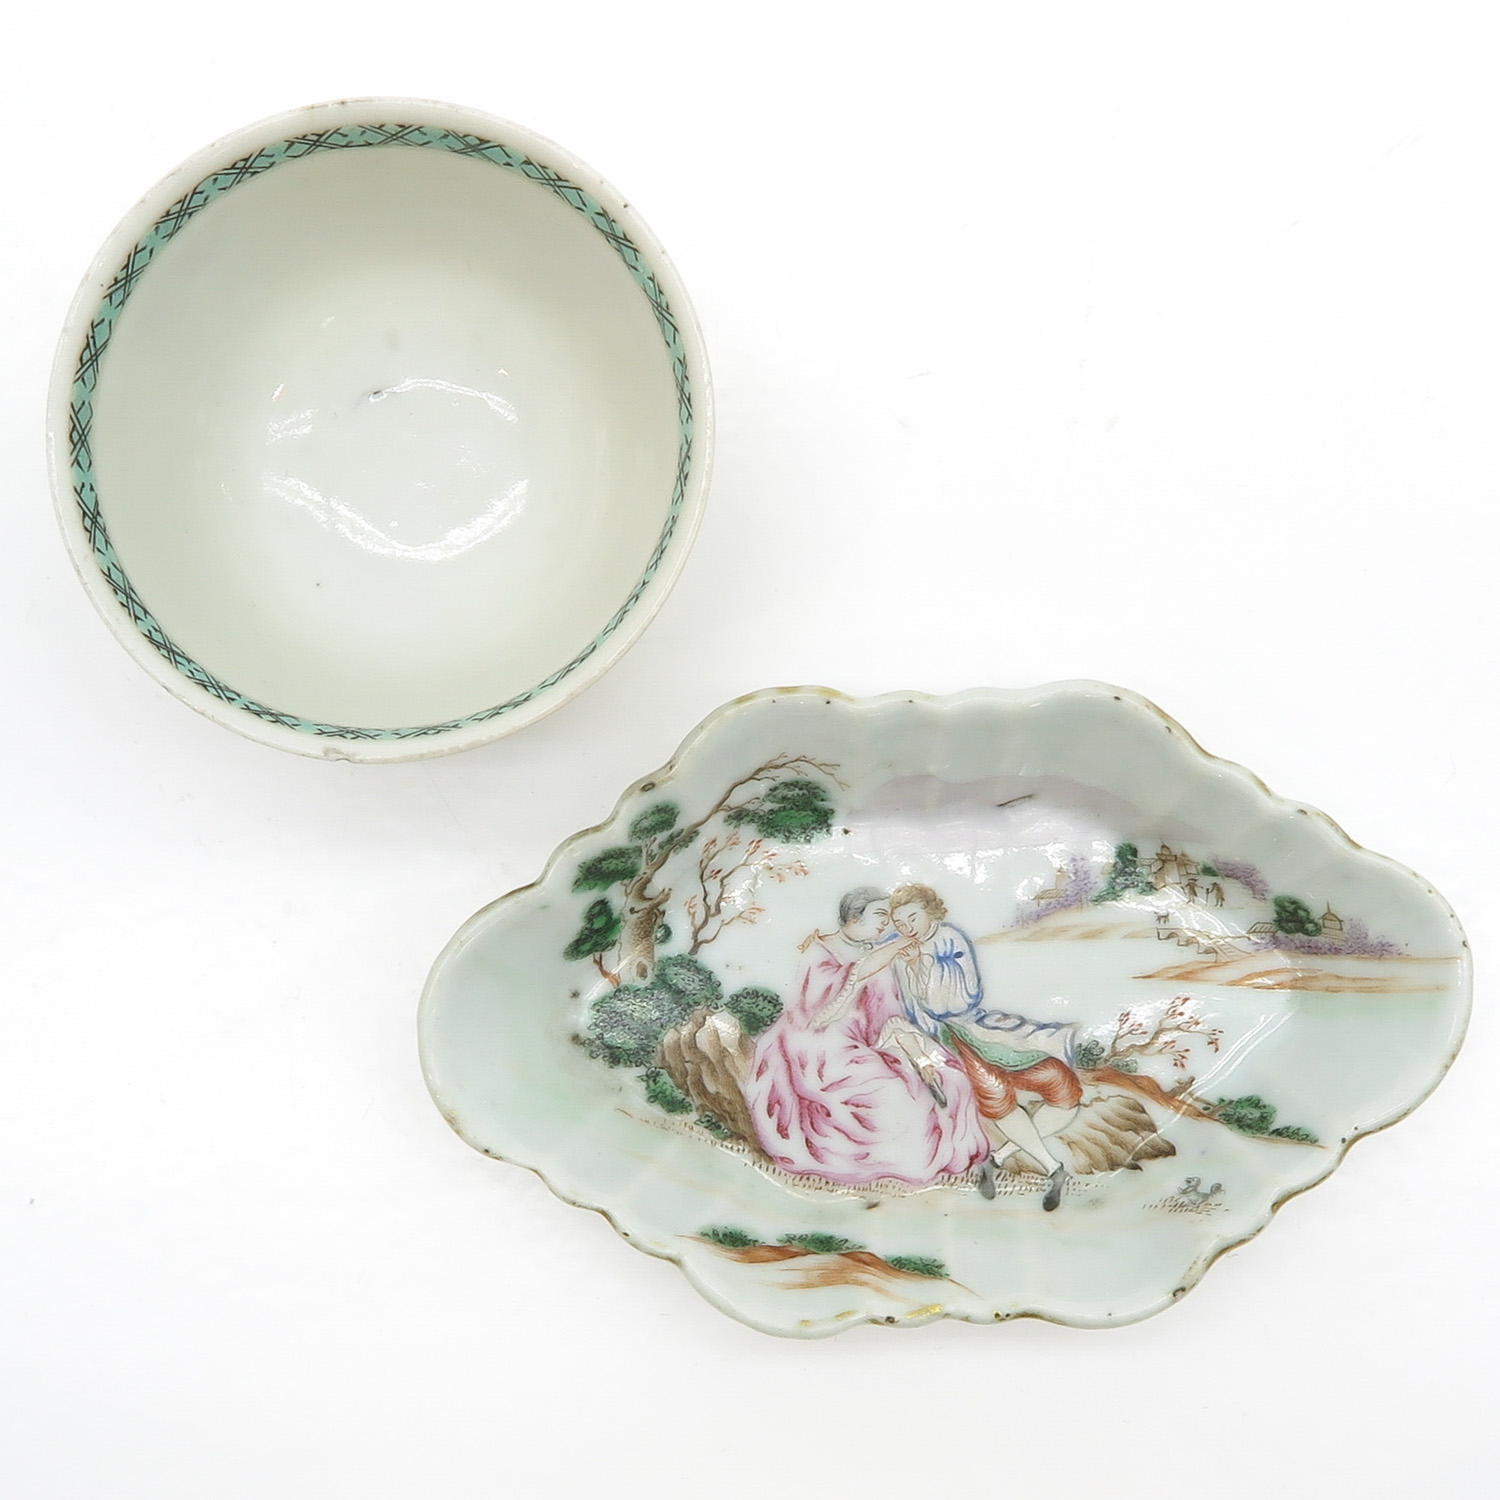 Lot of 18th Century China Porcelain - Image 5 of 6